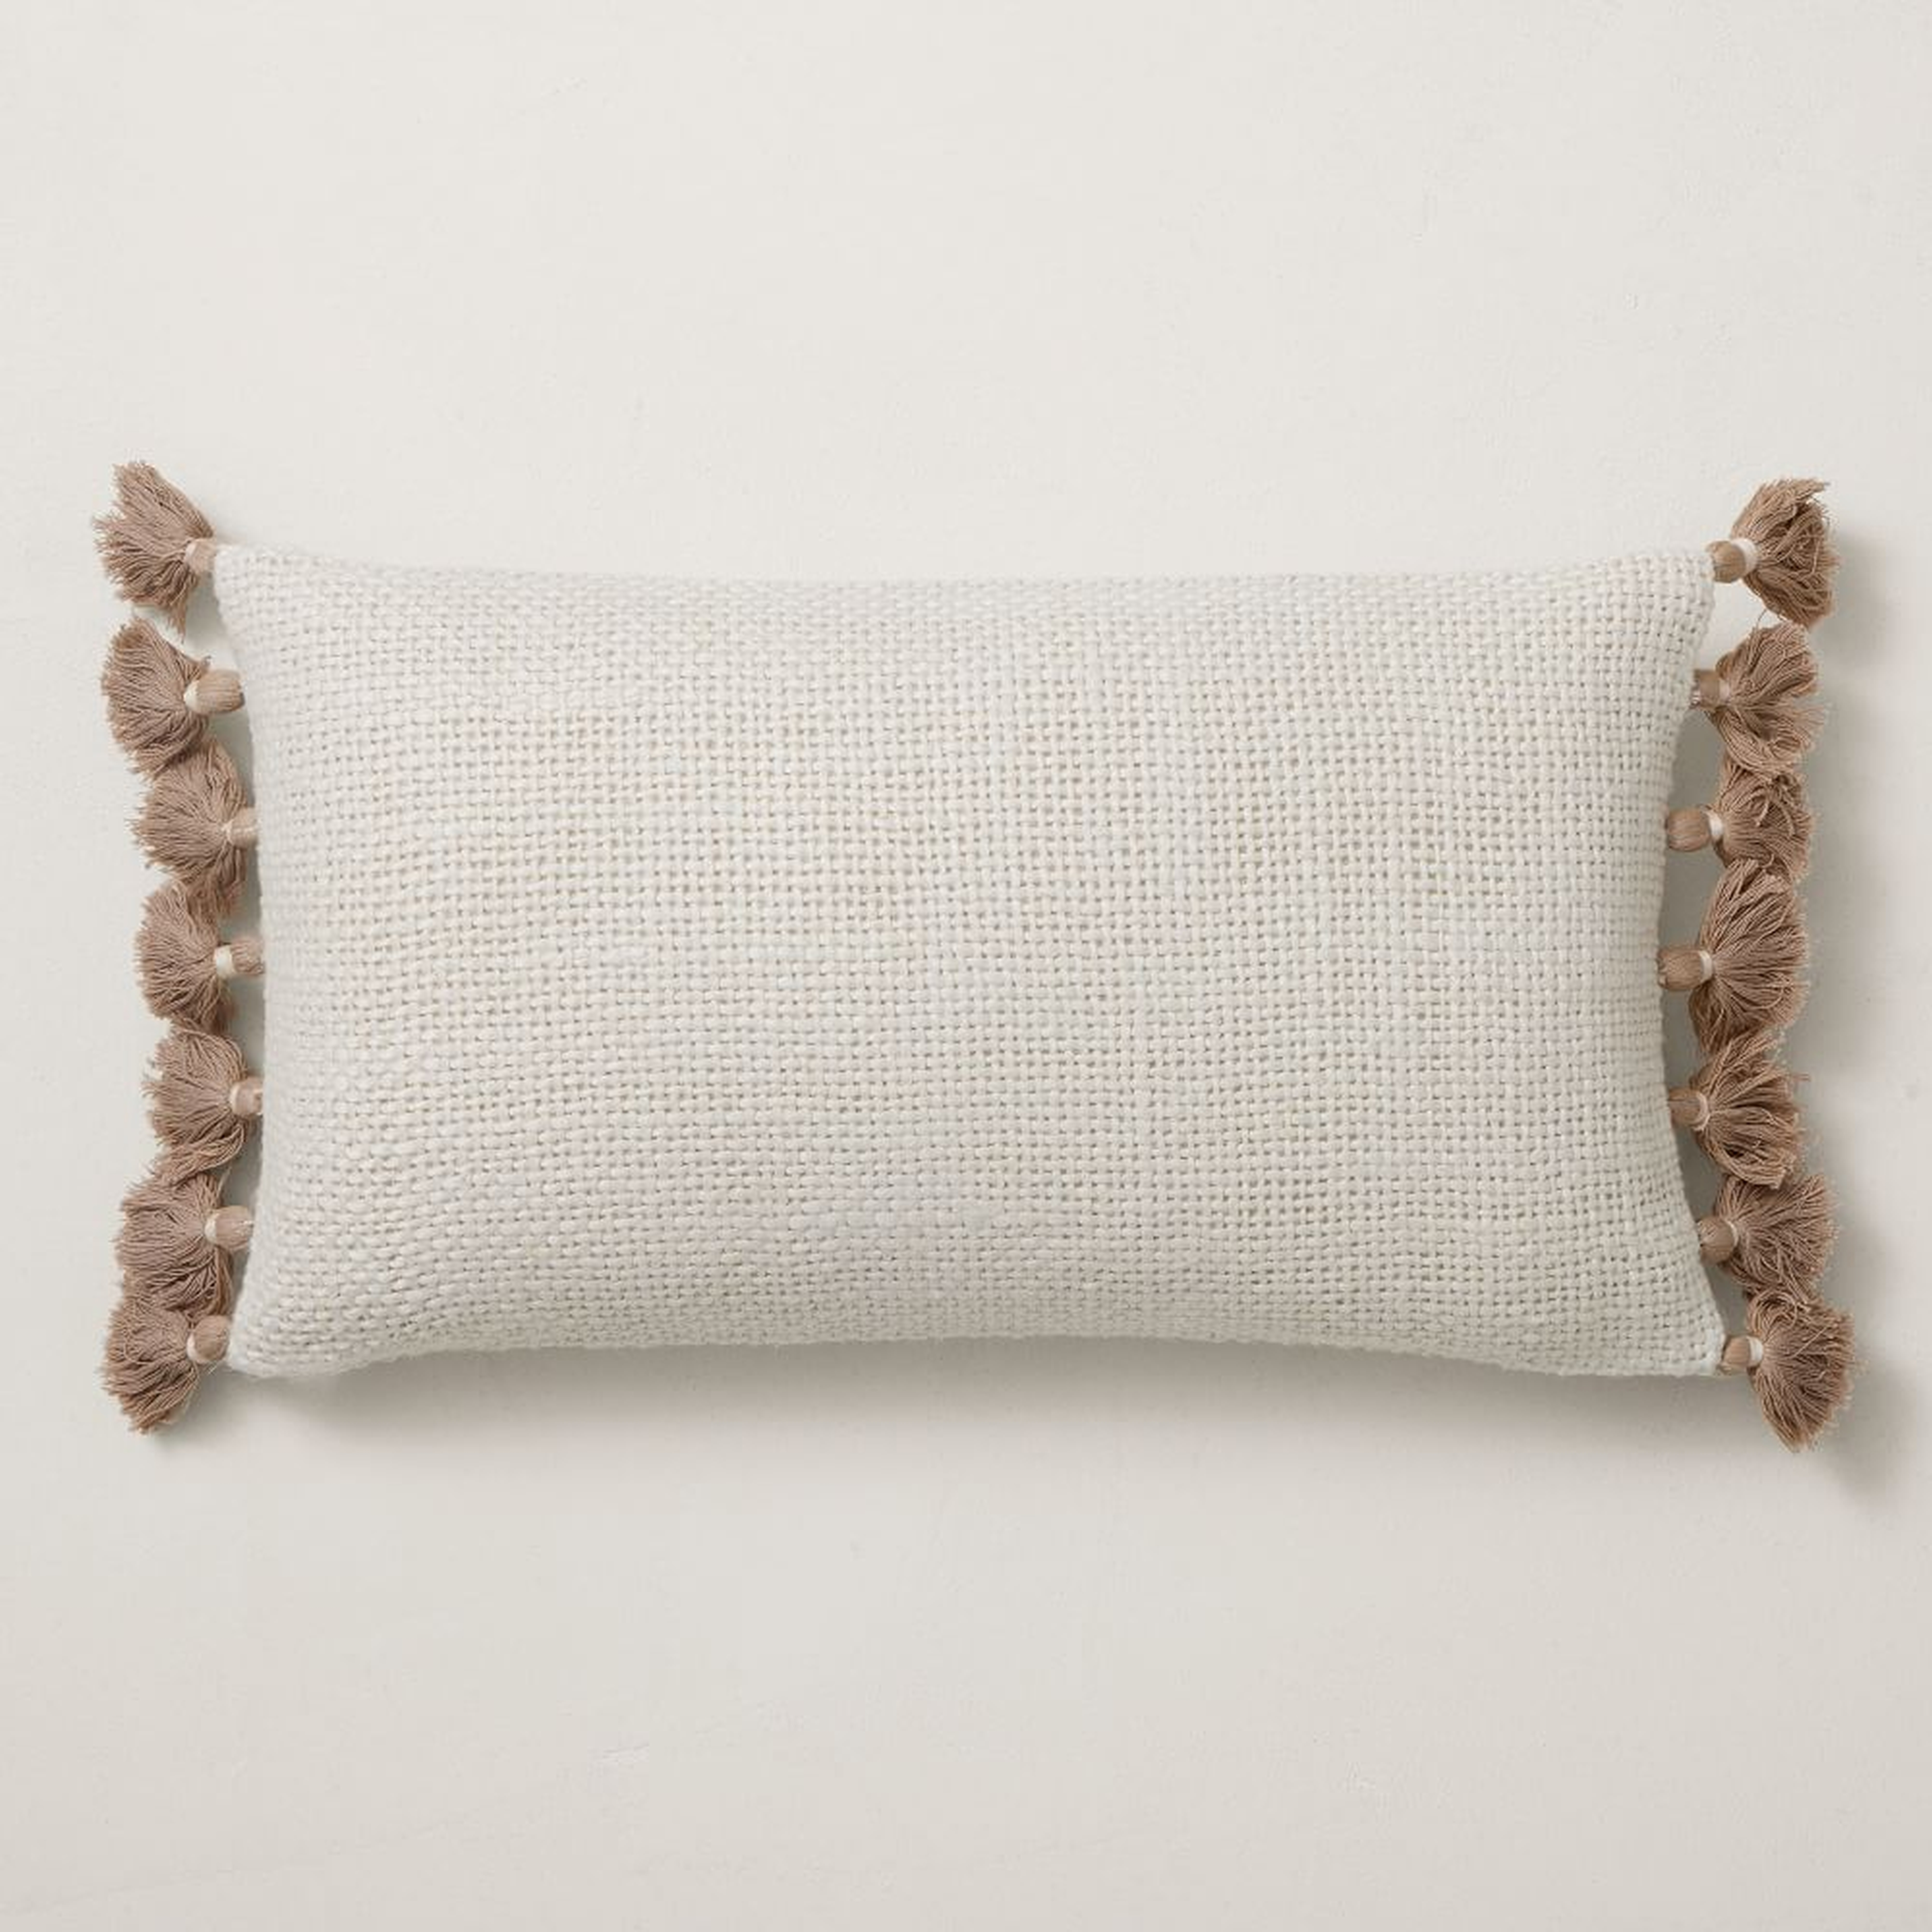 Two Tone Chunky Linen Tassels Pillow Cover, 12"x21", White - West Elm